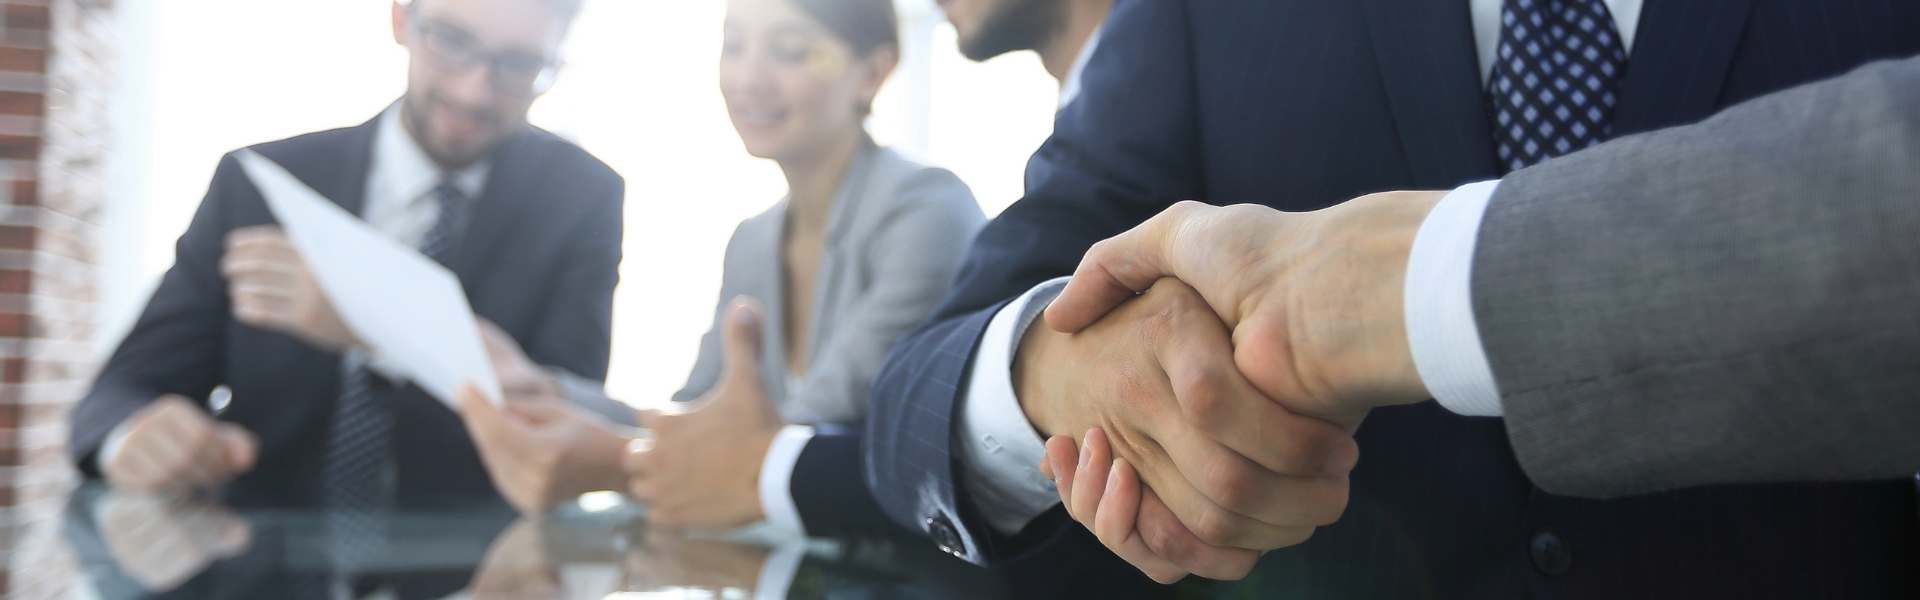 Insurance agents shaking hands